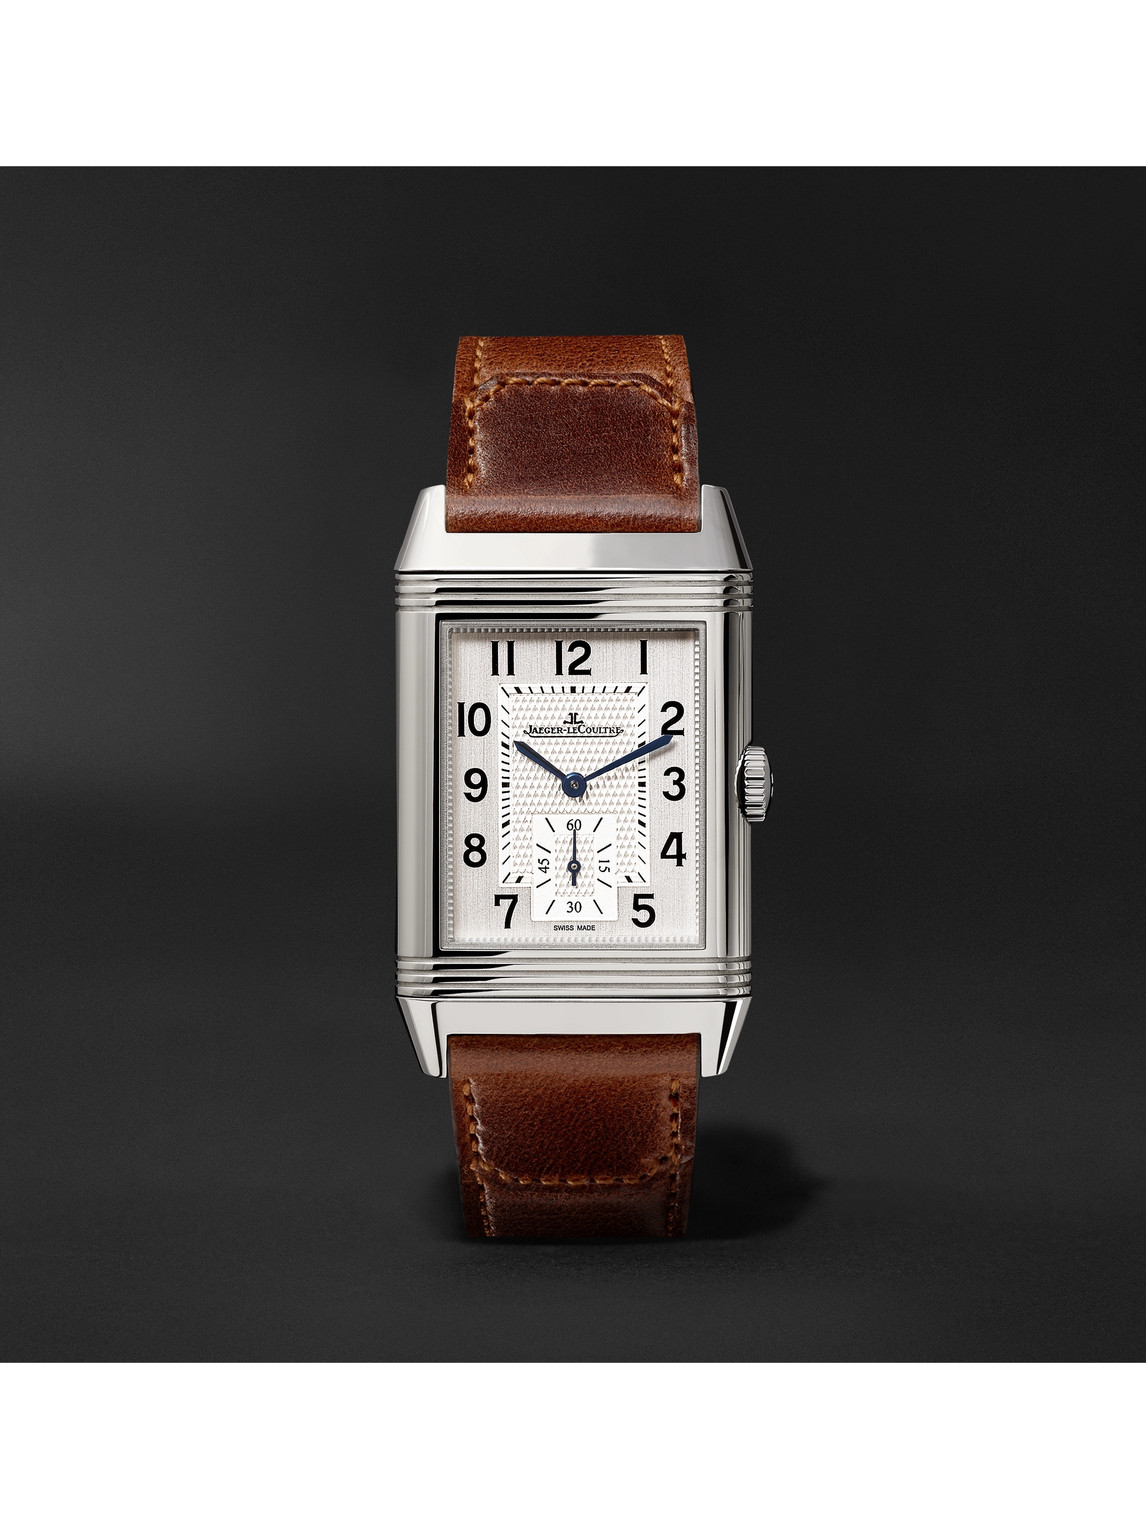 Jaeger-lecoultre Reverso Classic Medium Hand-wound 25.5mm Stainless Steel And Leather Watch, Ref. No. Q2438522 In White